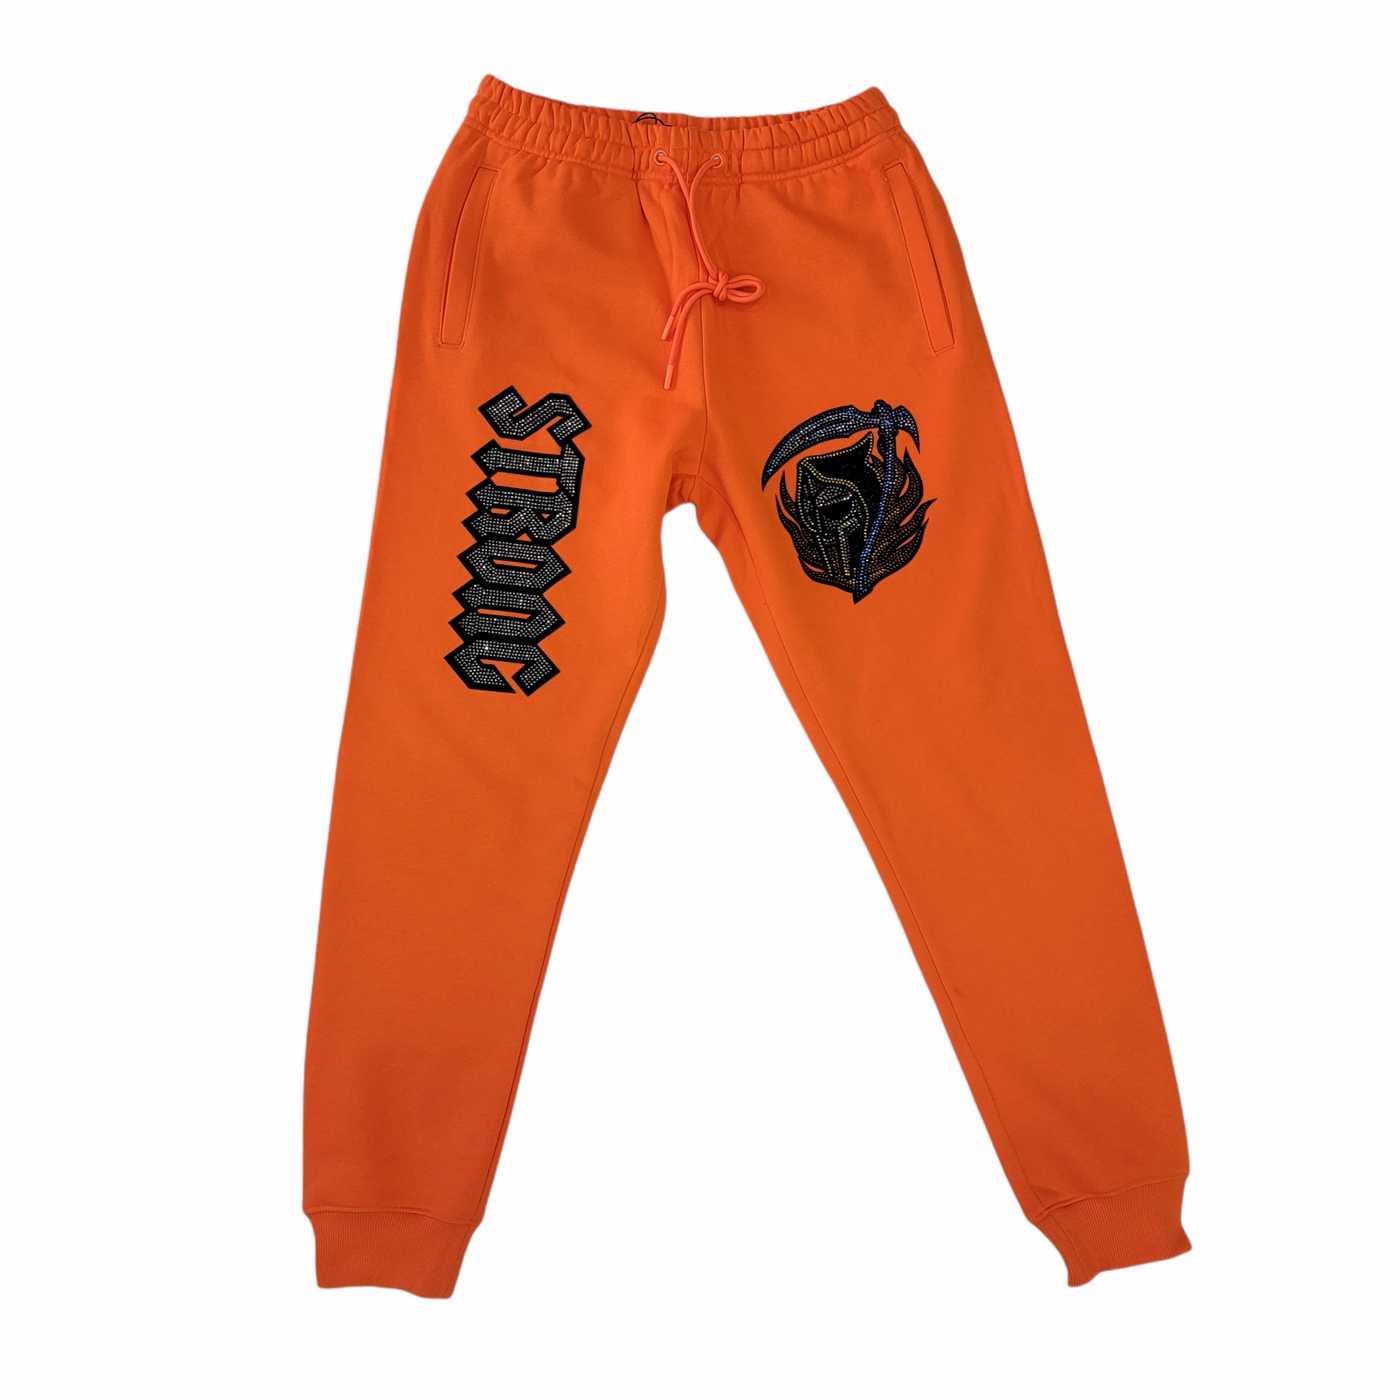 Only The Strong Sweatpants Orange